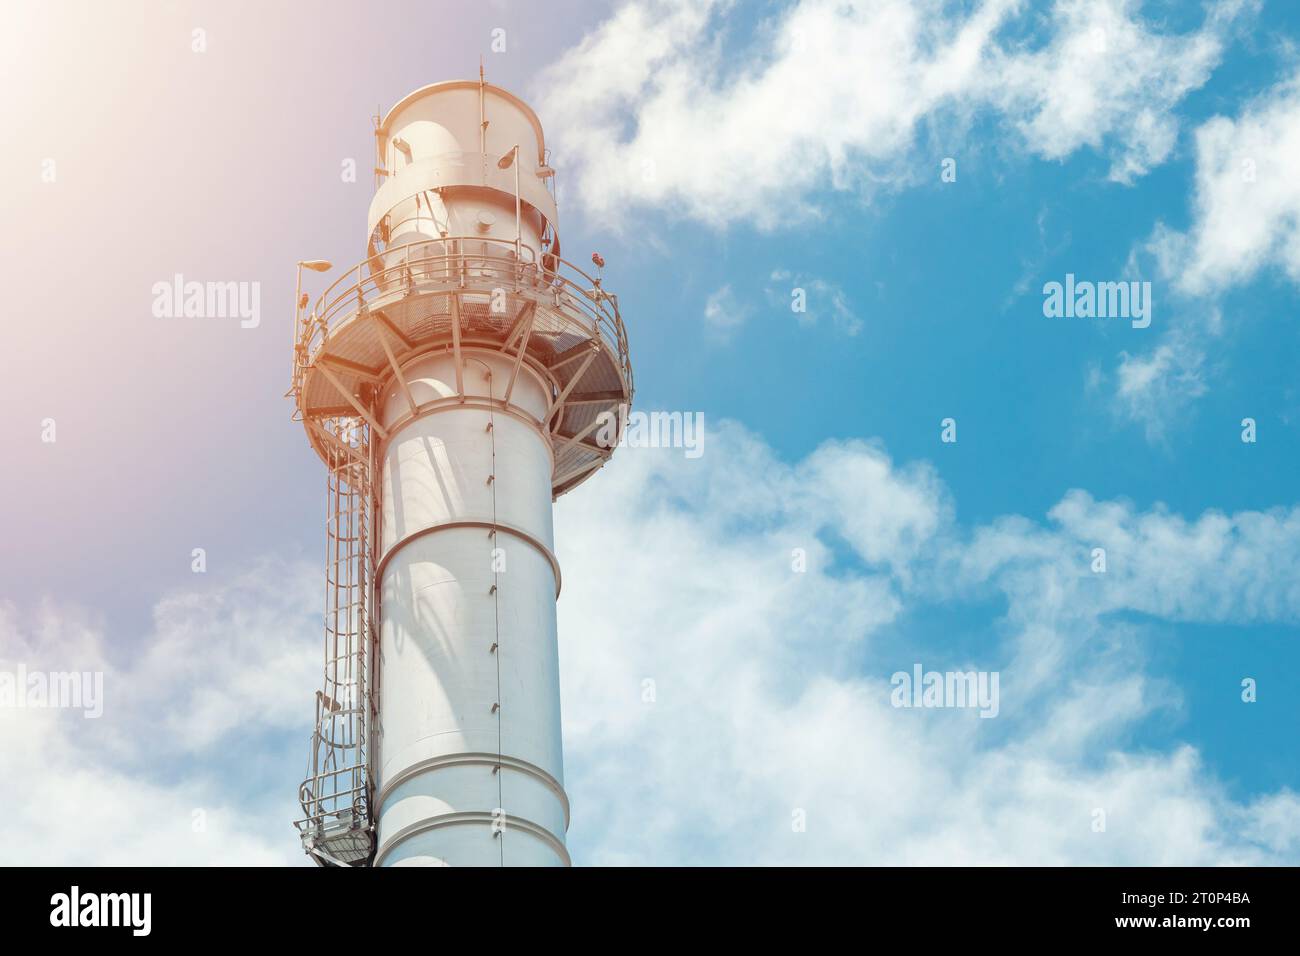 Industry Power Plant Chimney Engineering building against blue sky background Stock Photo